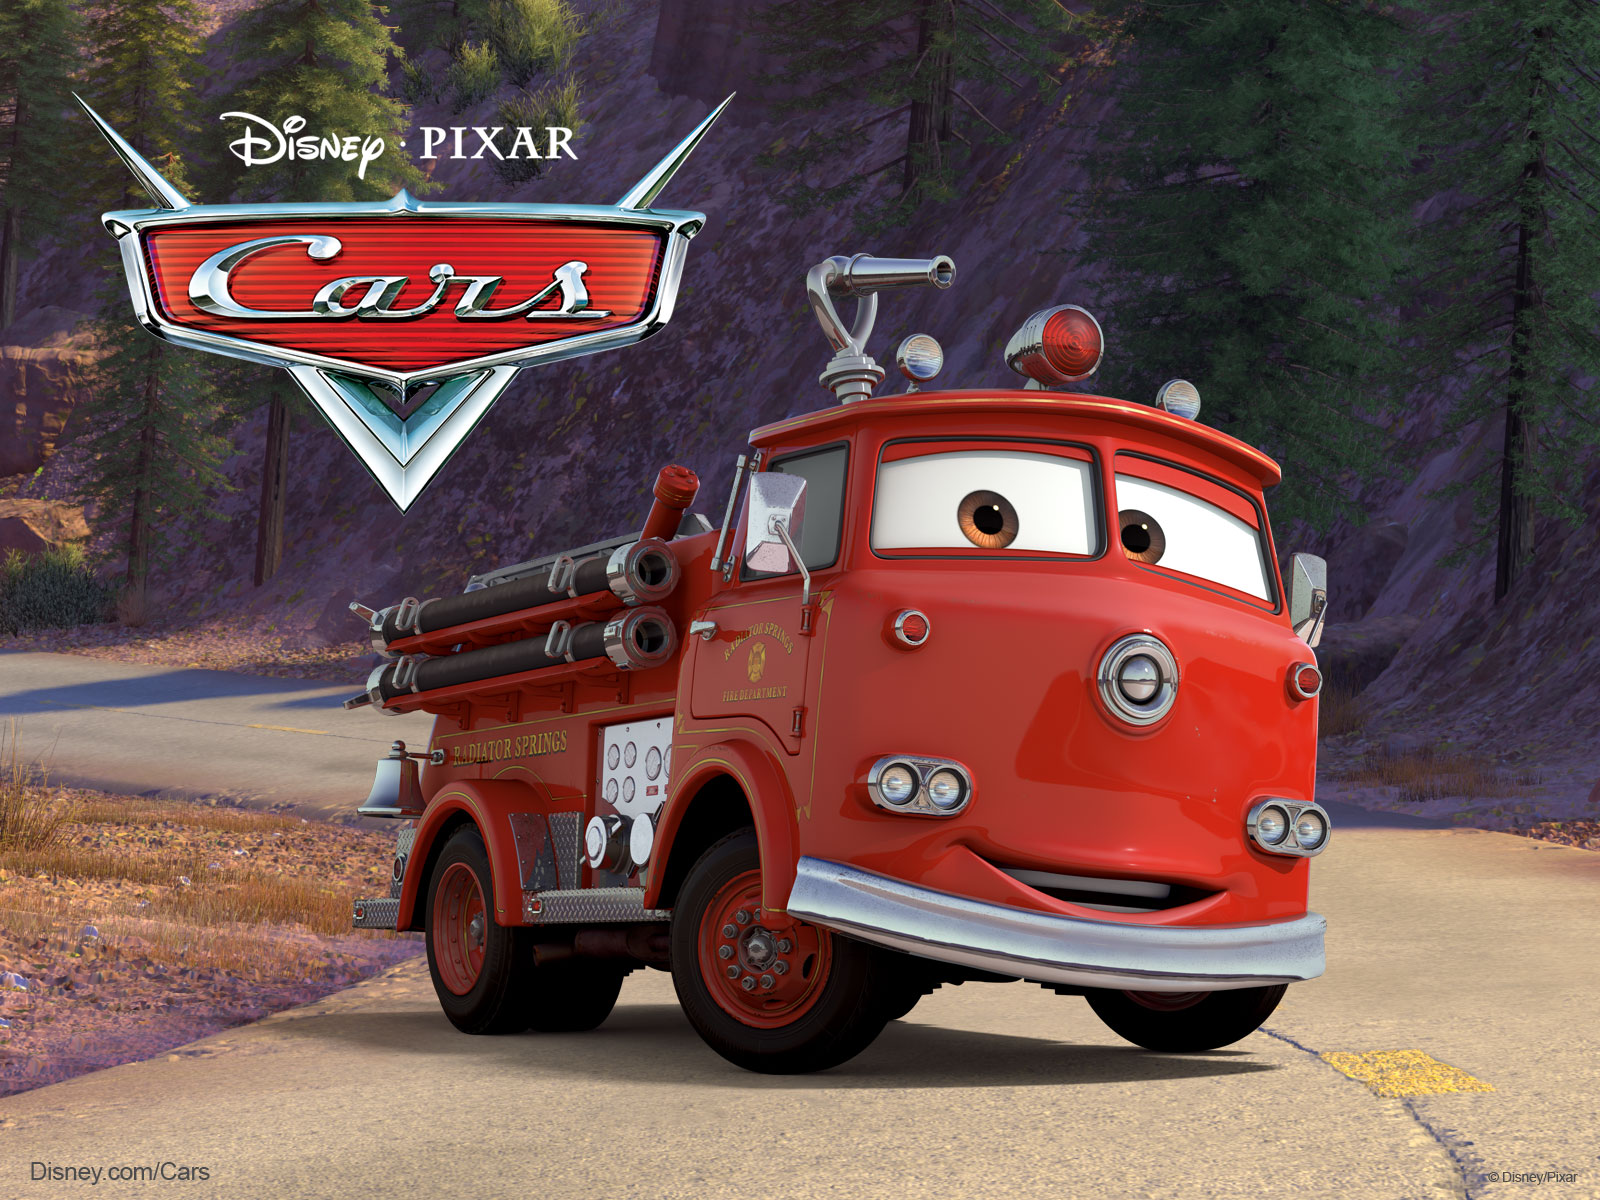 Red The Fire Engine Truck From Disney Pixar Movie Cars